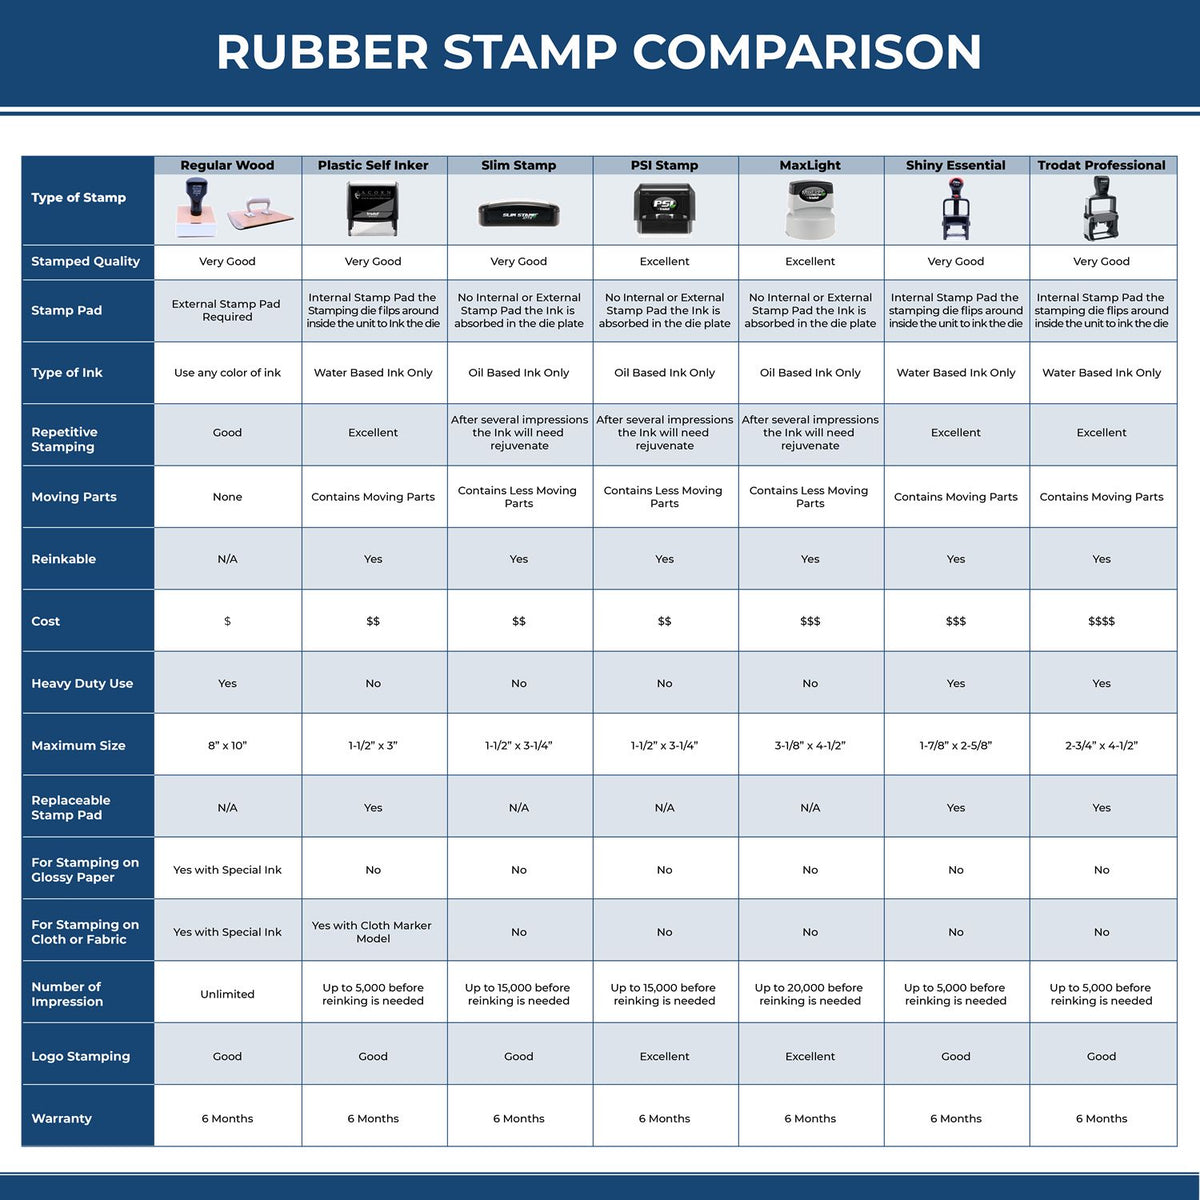 Large Joint Exhibit Rubber Stamp 4609R Rubber Stamp Comparison